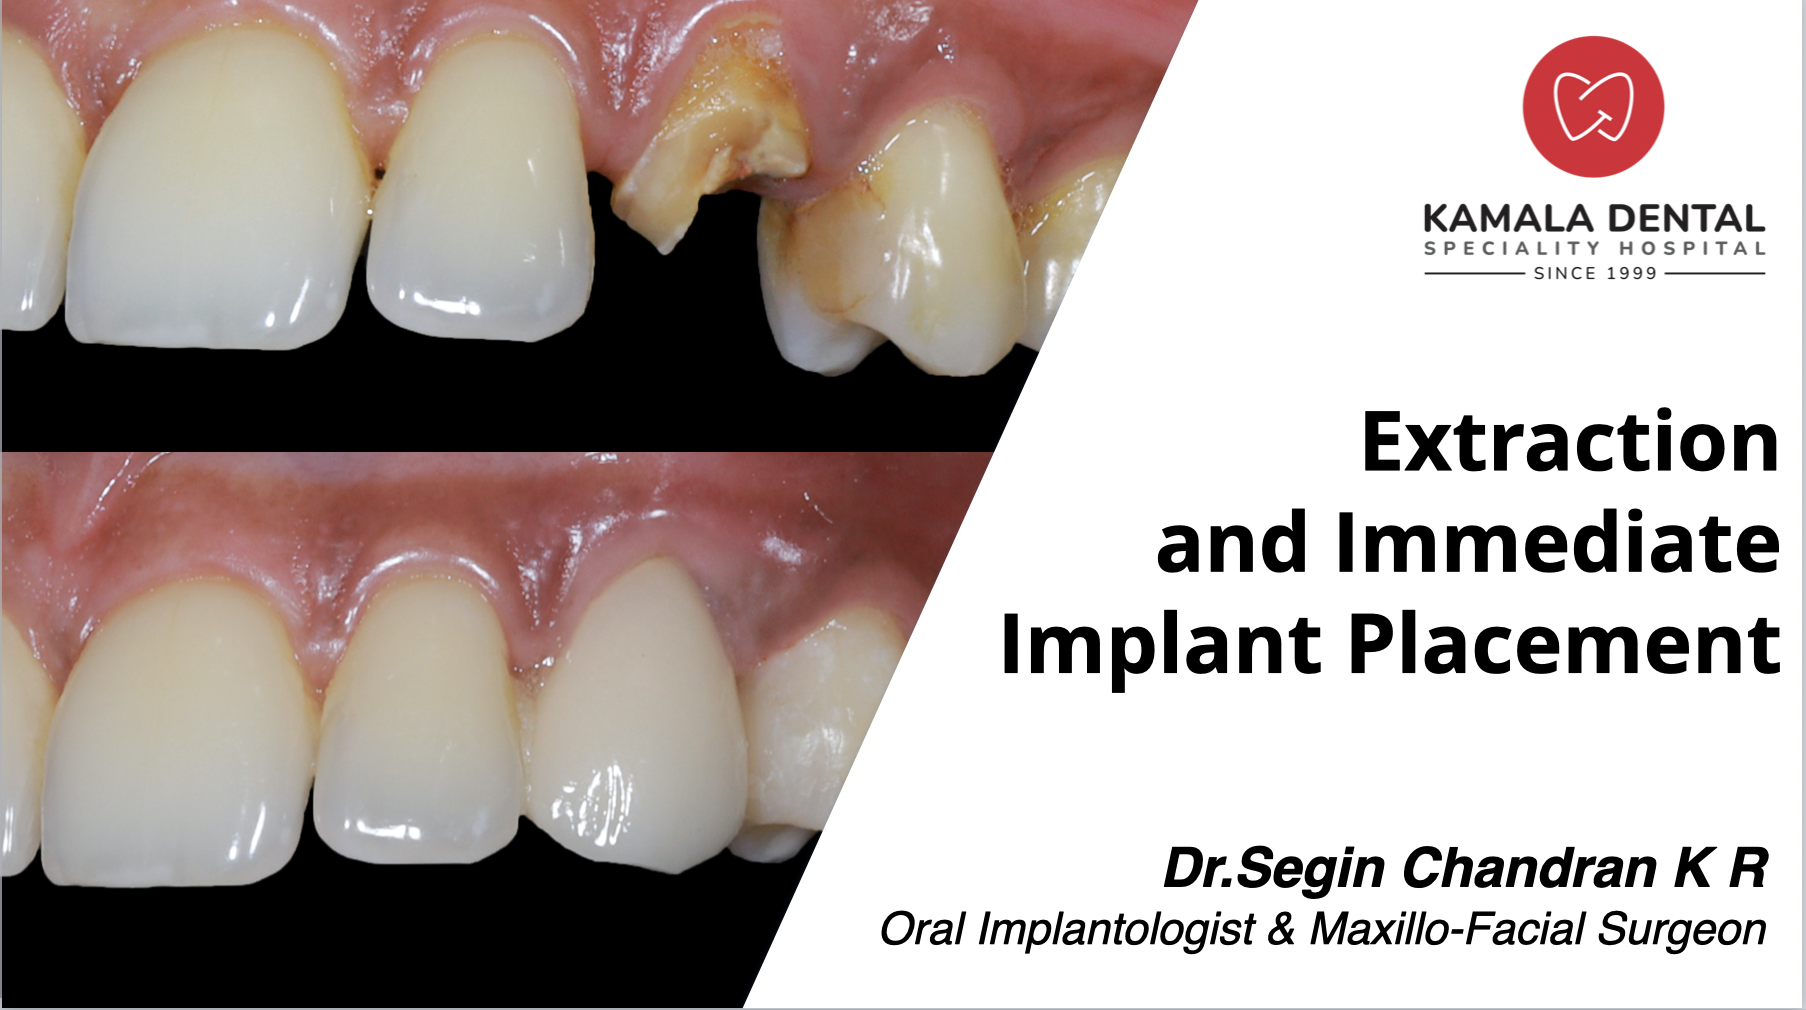 Immediate Implant Placement after Extraction